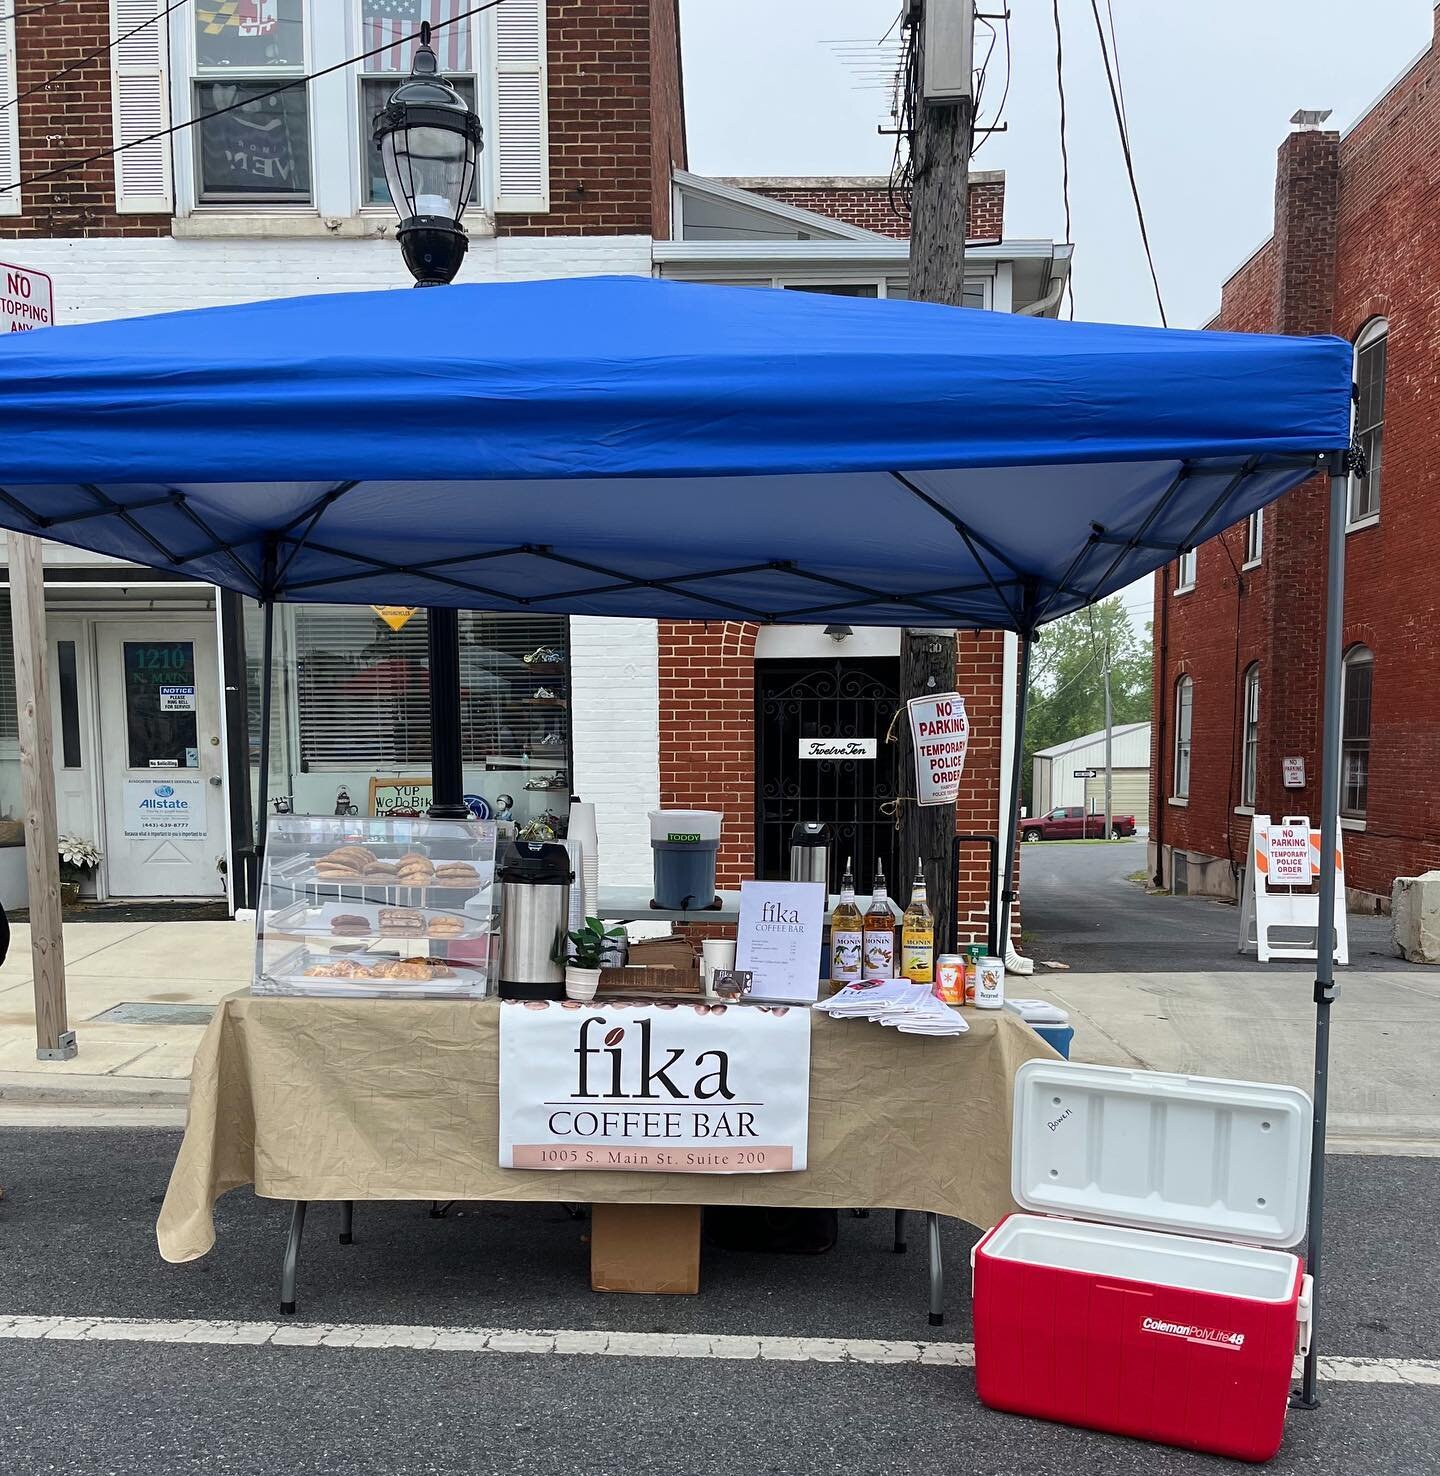 Good morning!🌤️
Fika Coffee Bar has a spot in Hampstead Days! Come grab a drink and a pastry while enjoying the Main Street festivities! ☕️🍪✨

Open 7-3: Monday-Saturday

#fikacoffeebar #hampstead #hampsteaddays #local #smallbusiness #fika #coffeeba